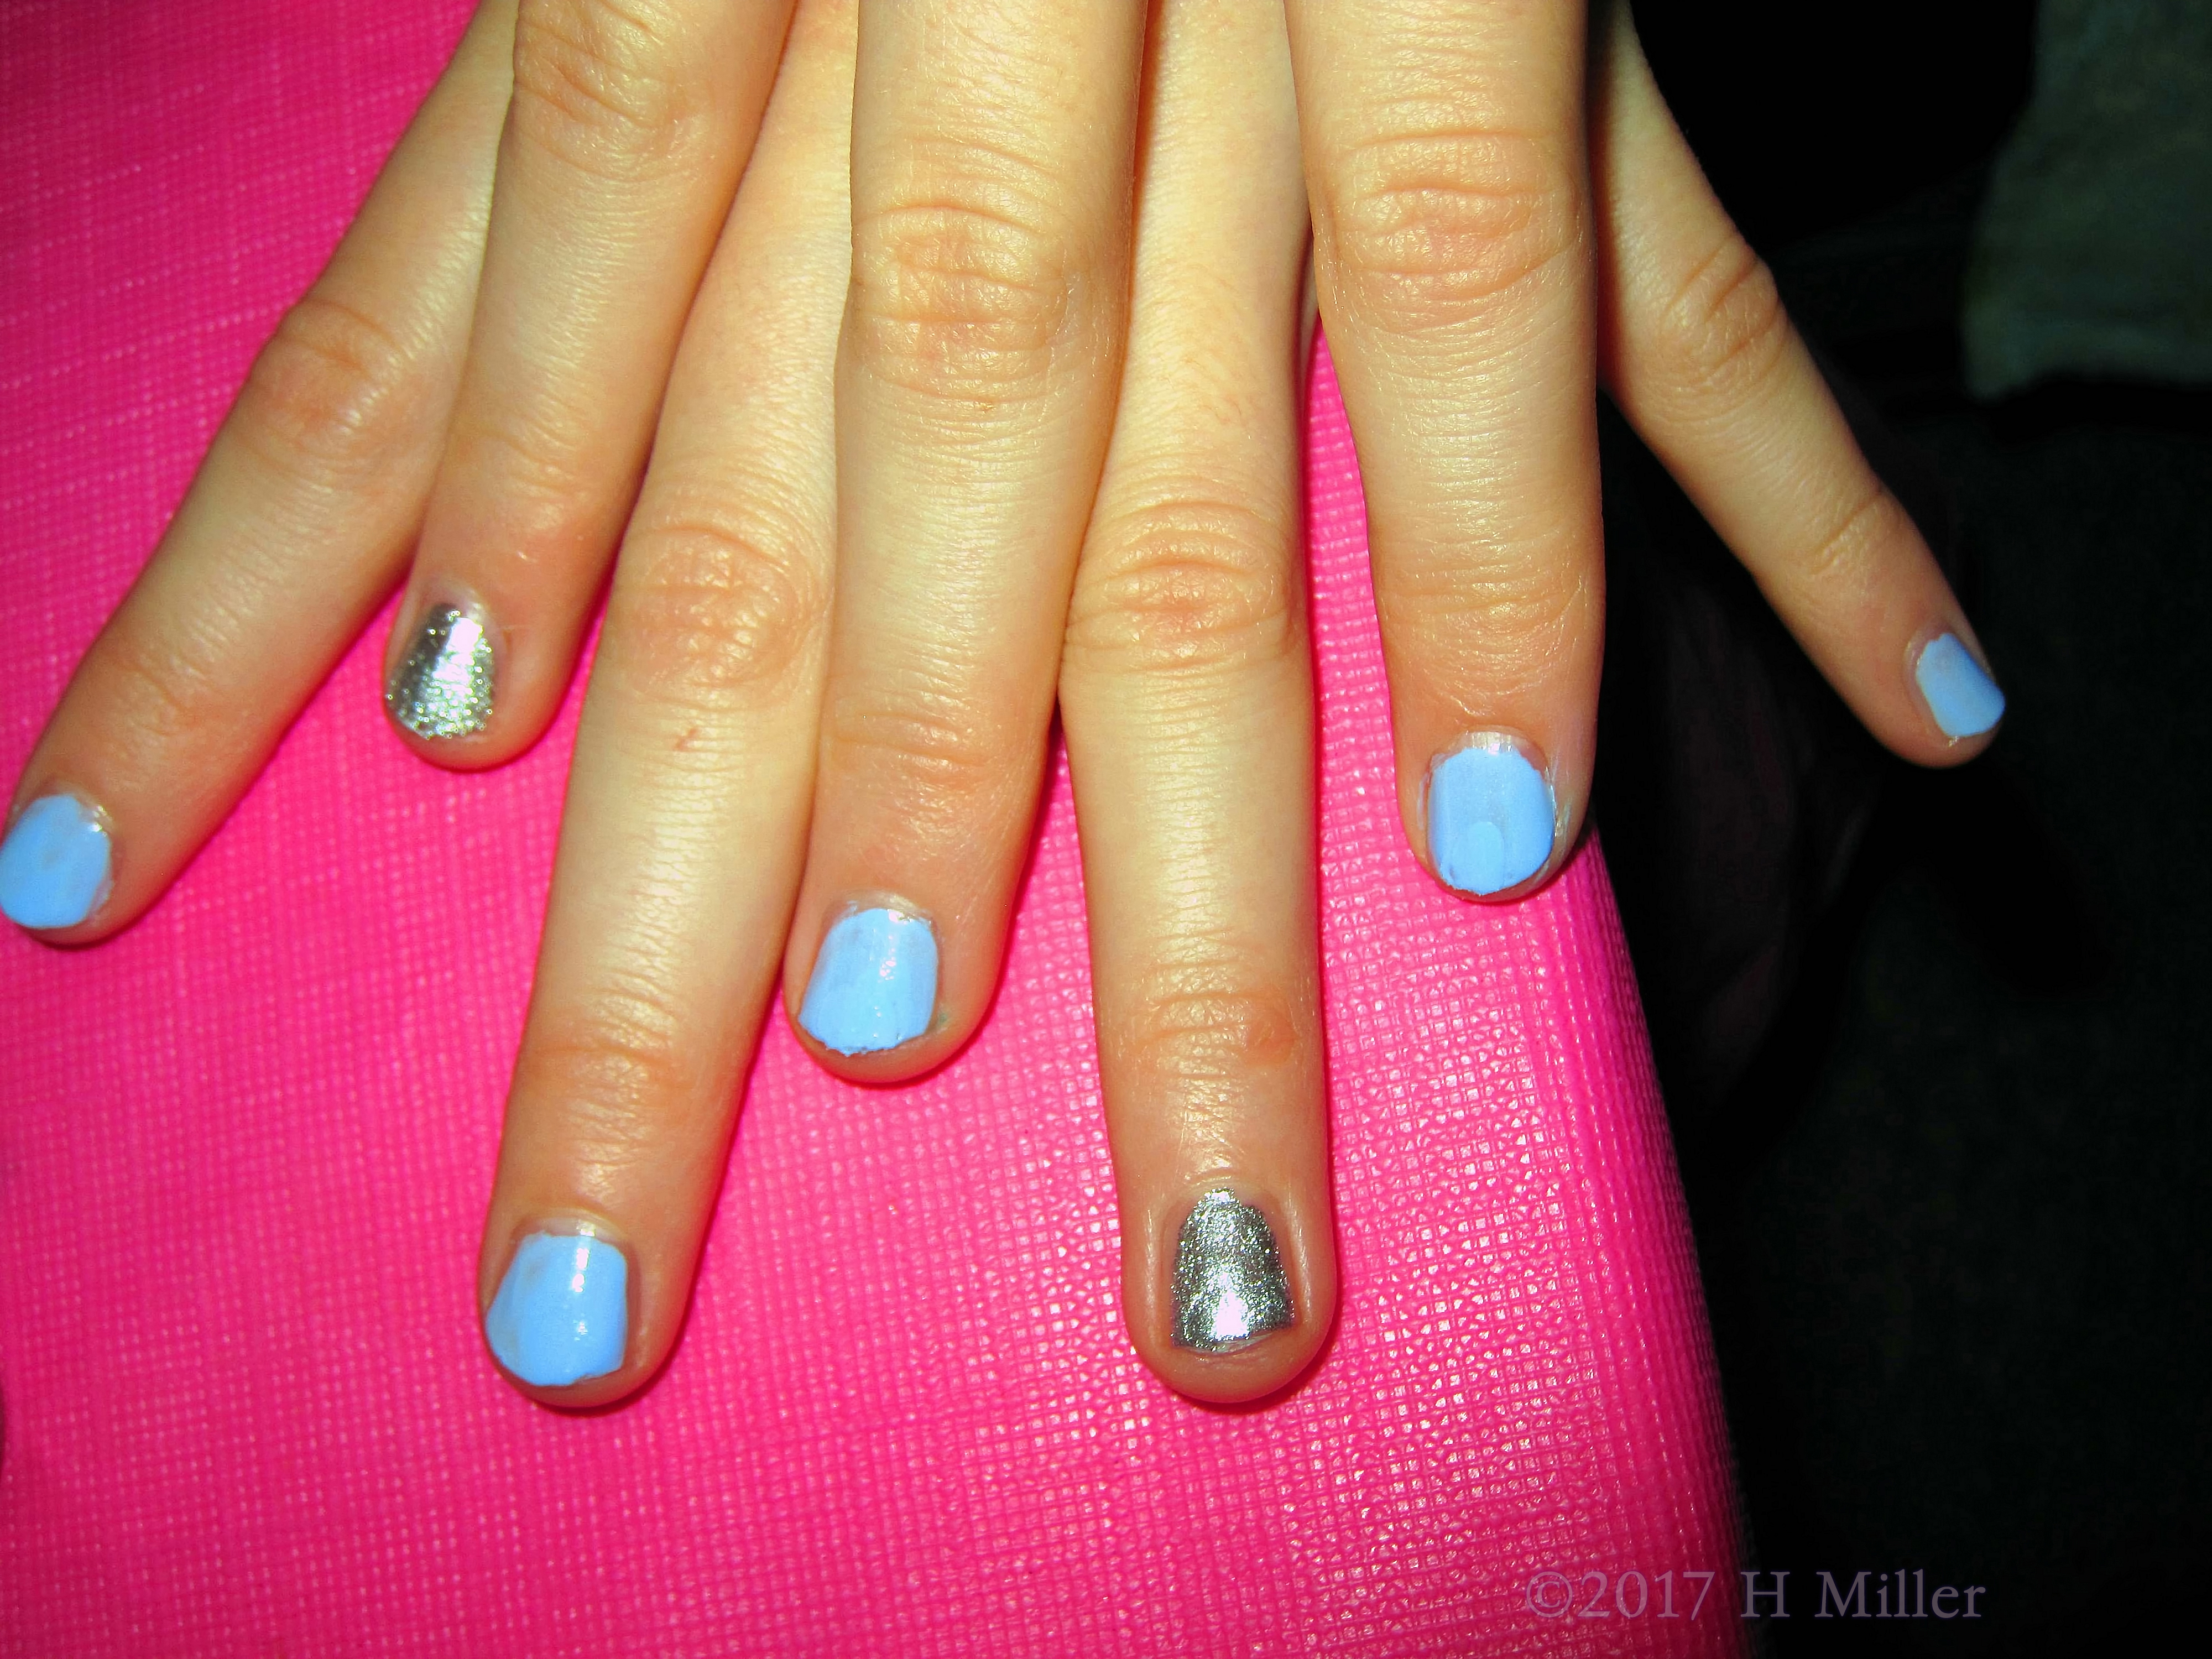 What A Pretty Mini Manicure With Blue And Silver Polish! 